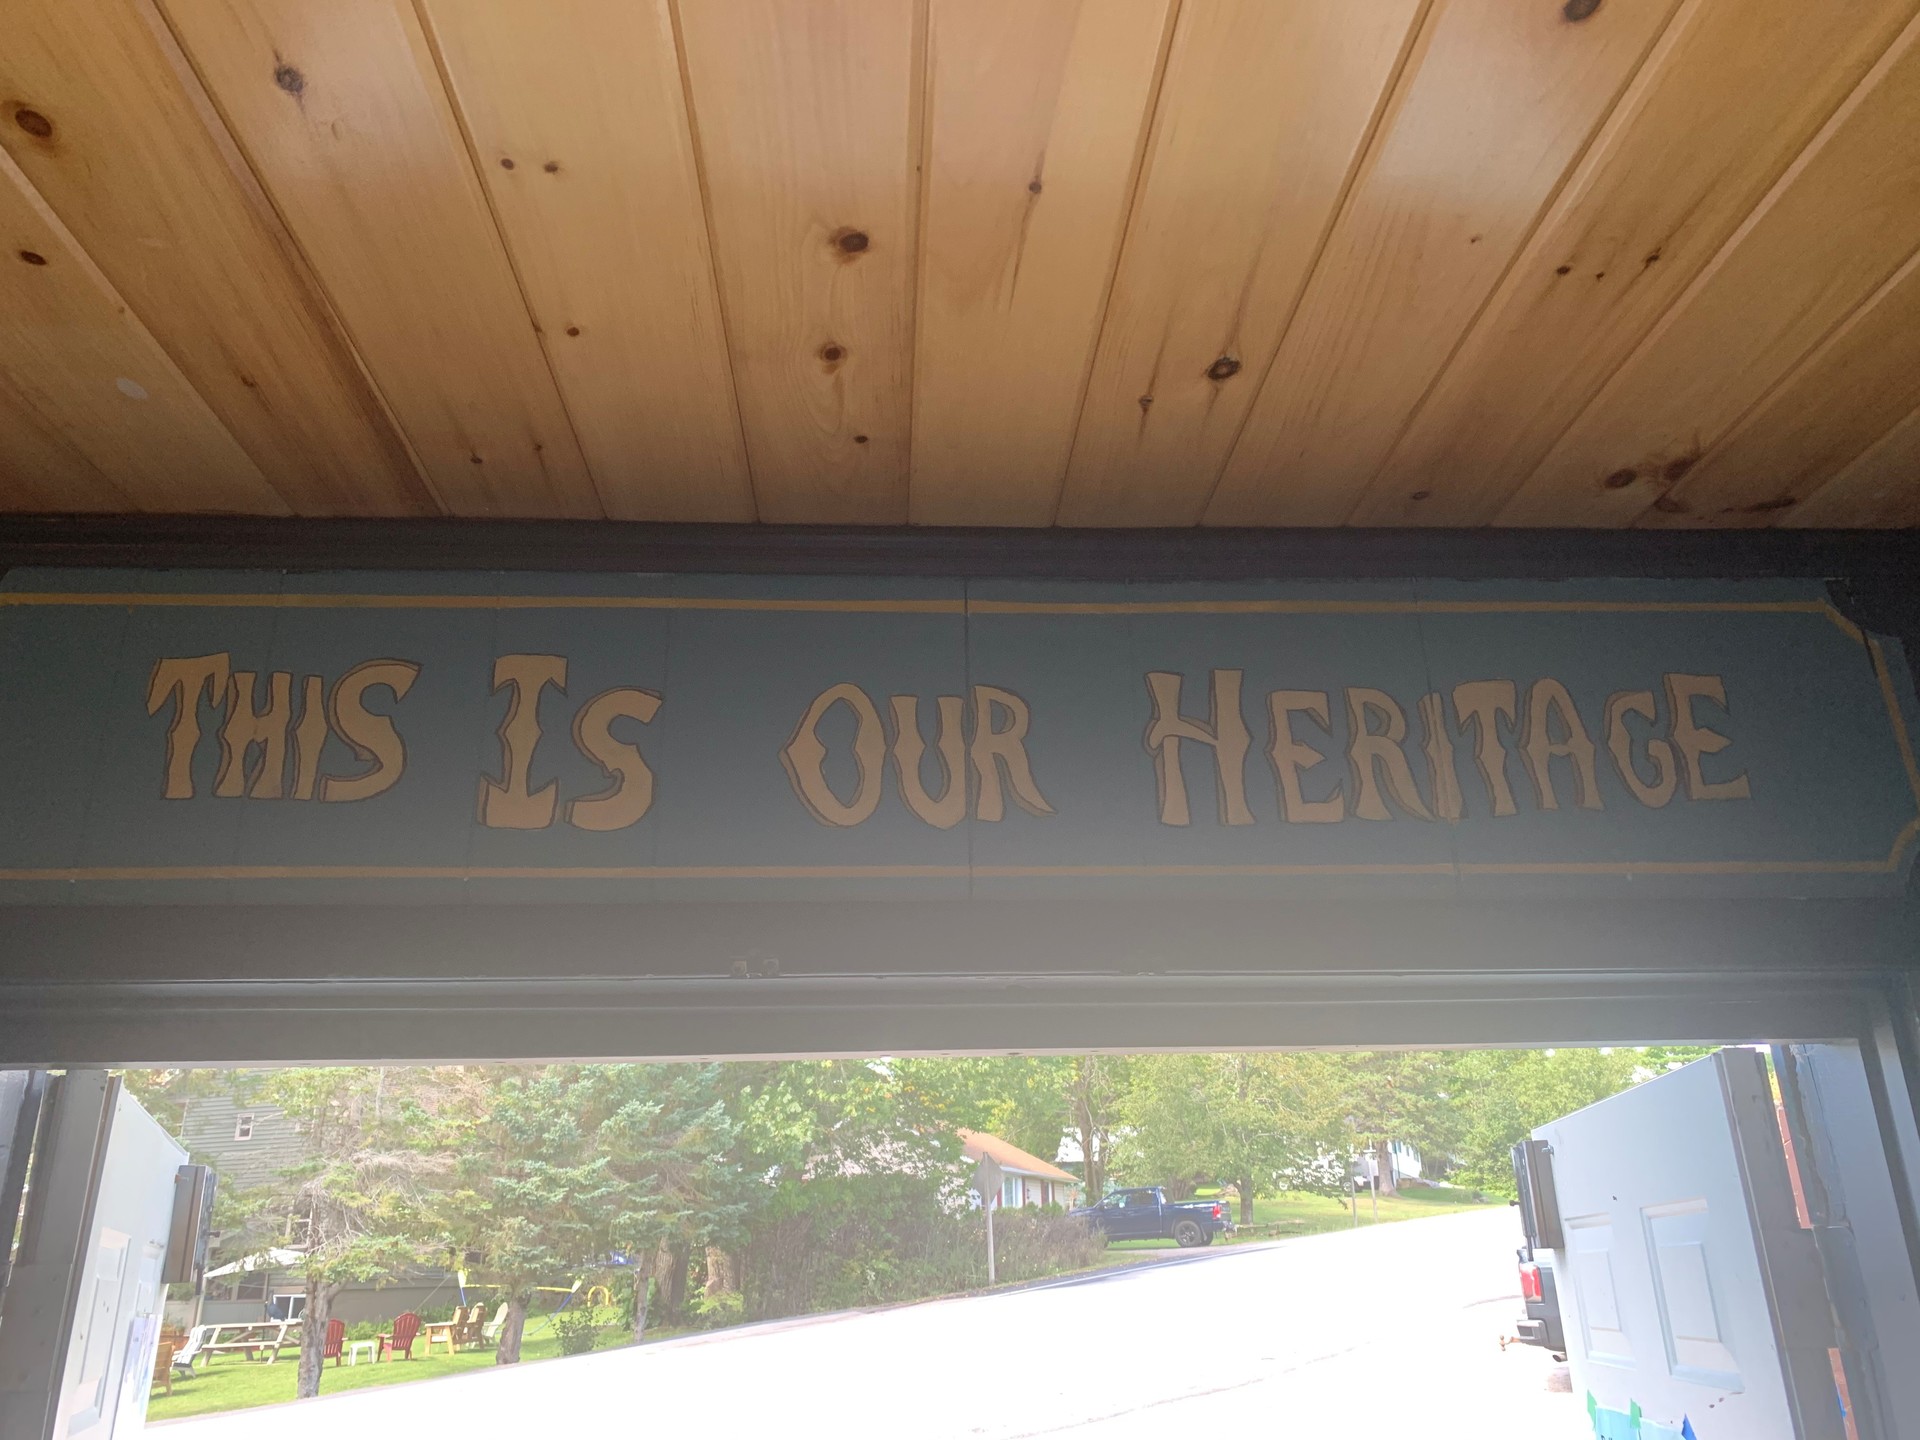 this is our heritage painted above a doorway